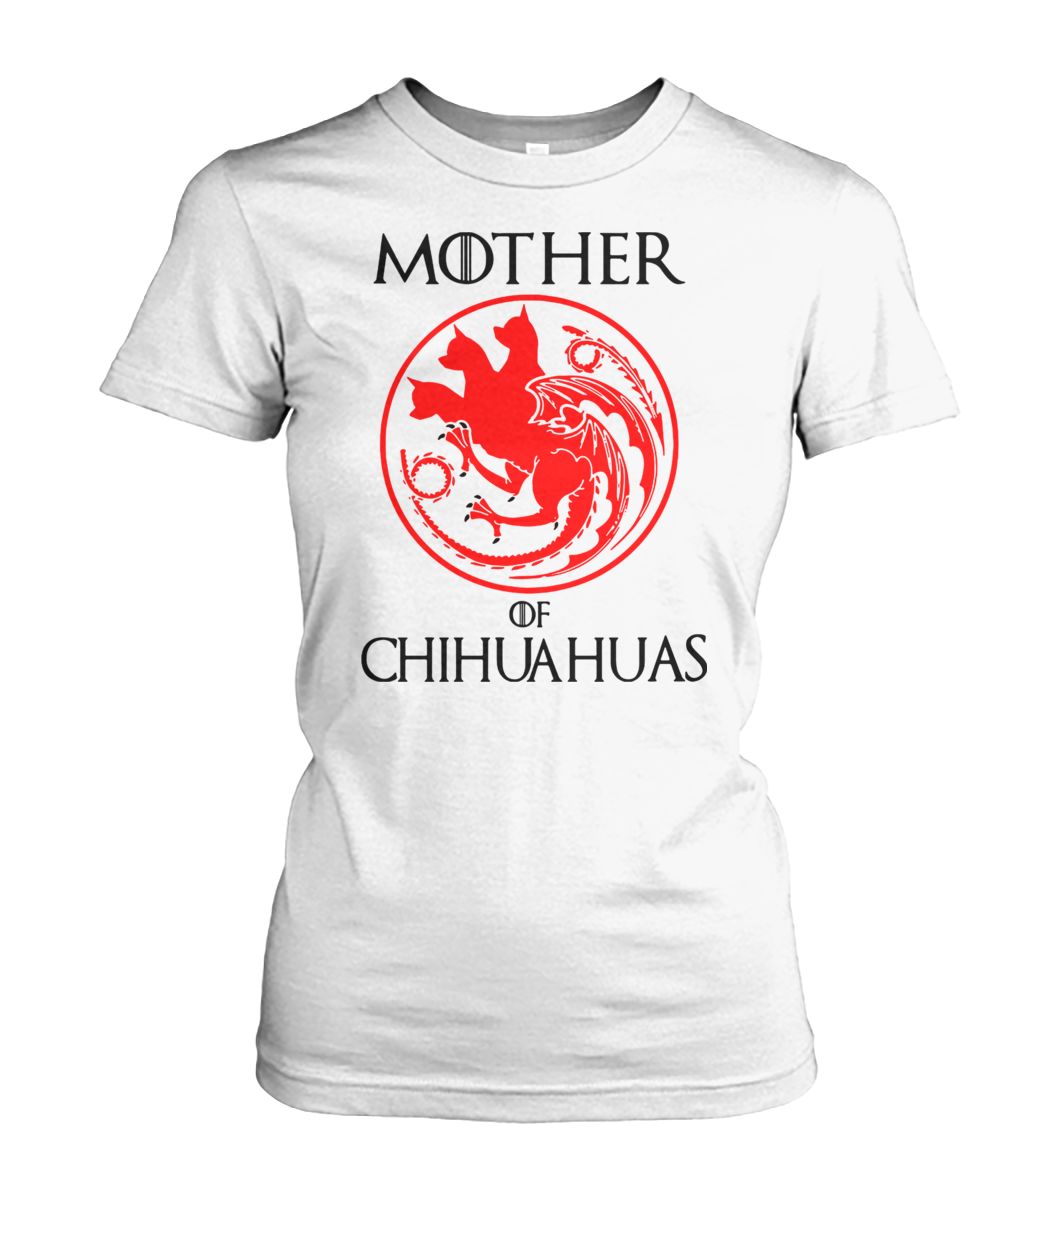 Game of thrones mother of chihuahuas women's crew tee